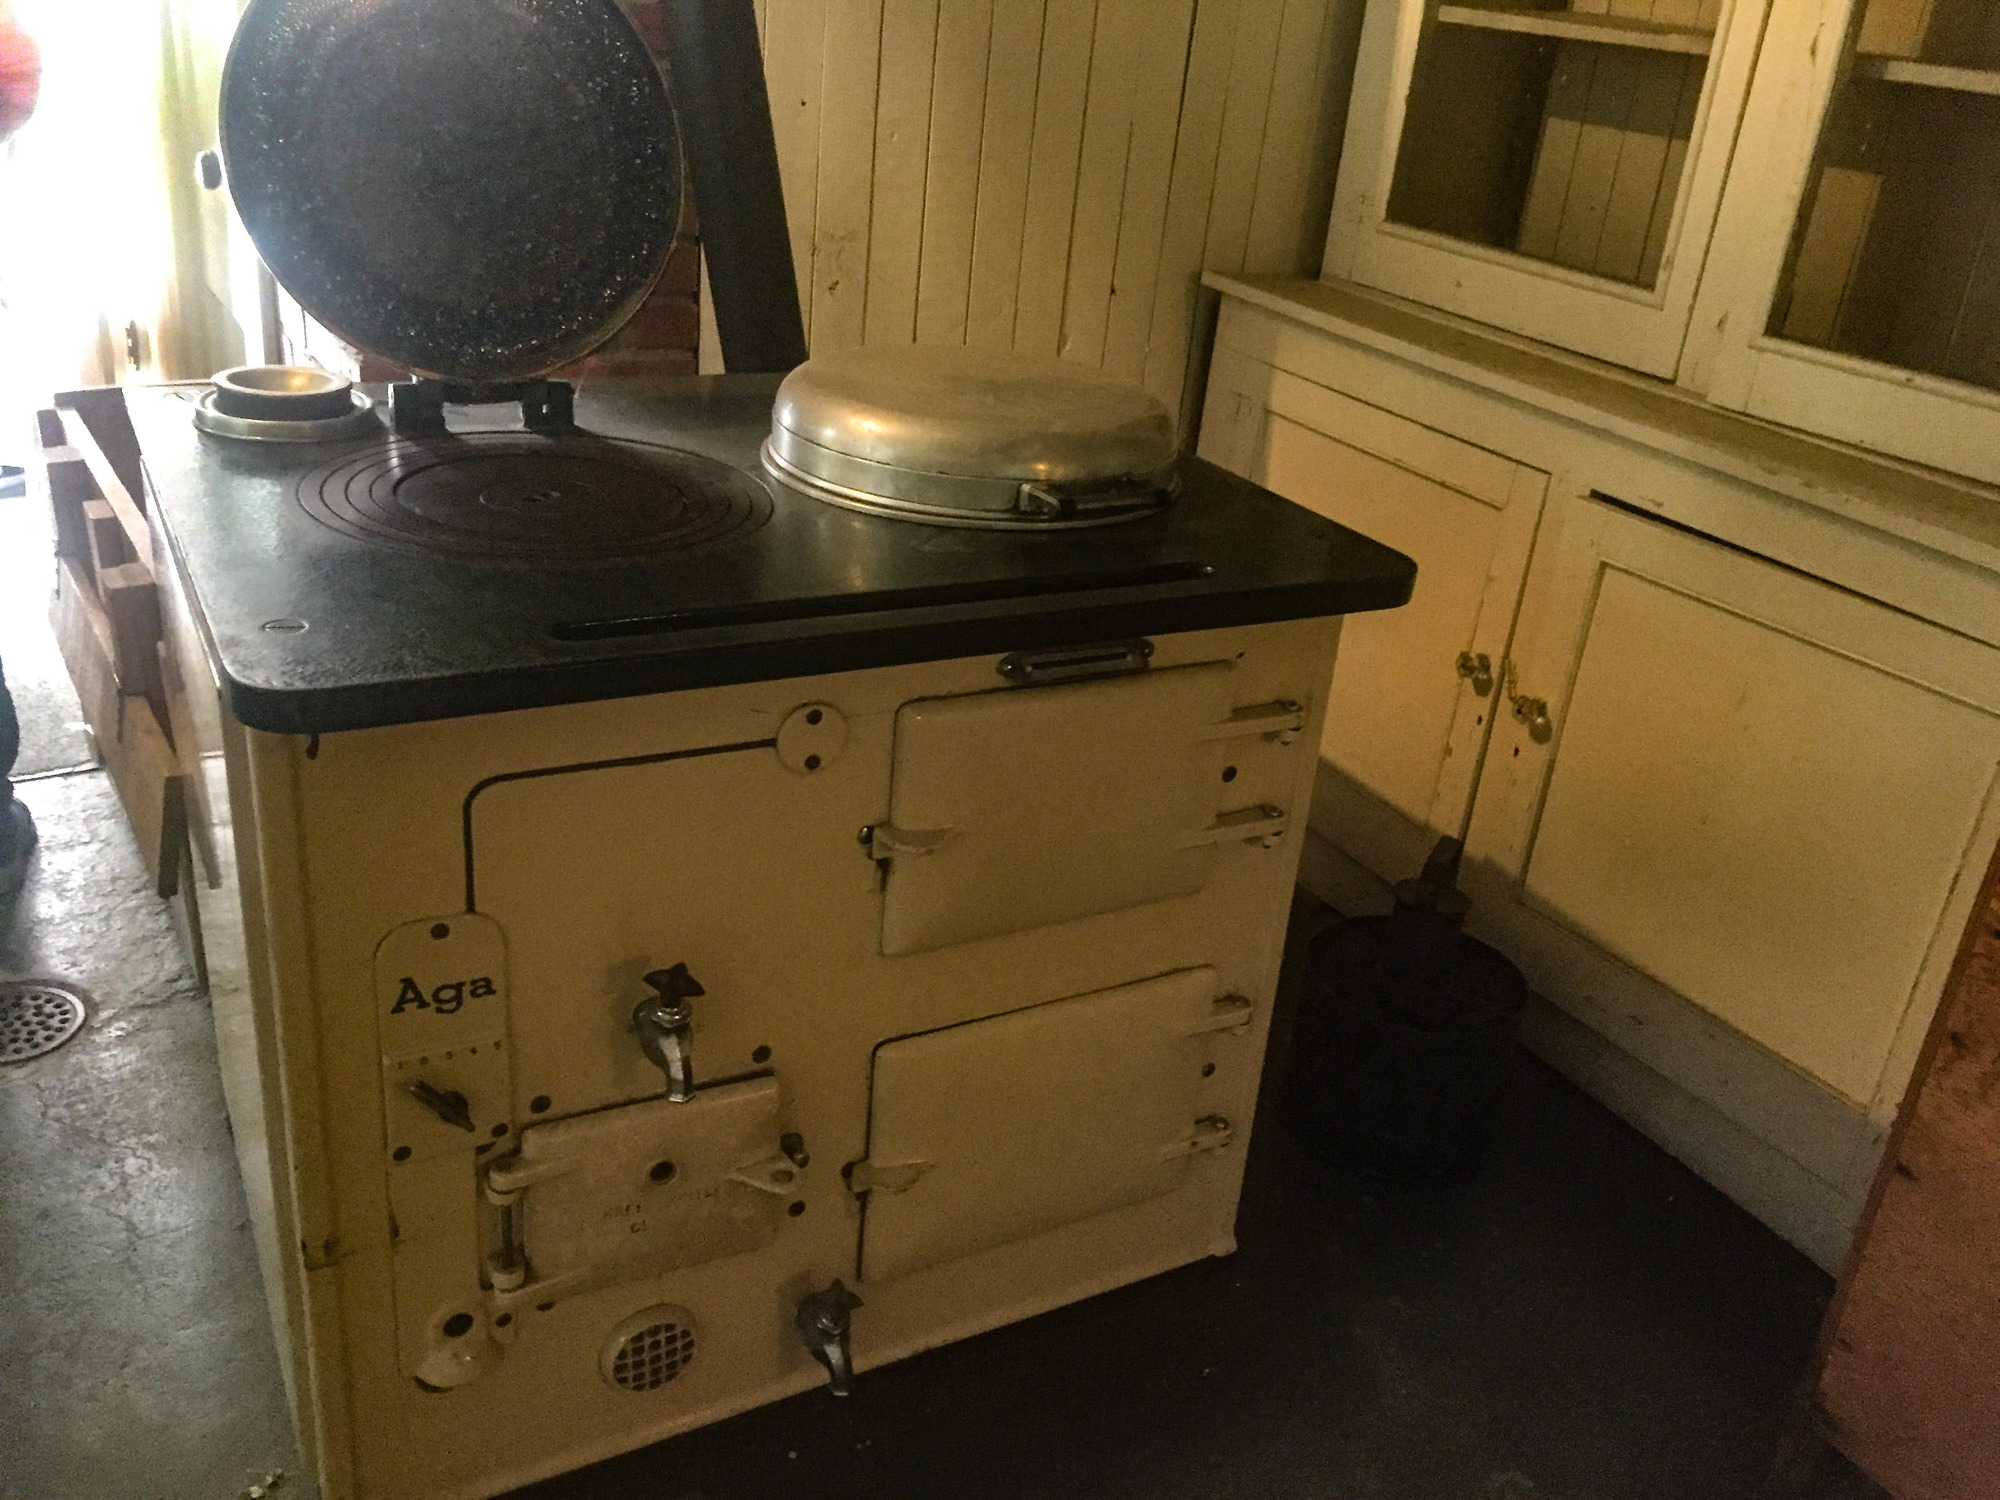 Historic stove in a kitchen